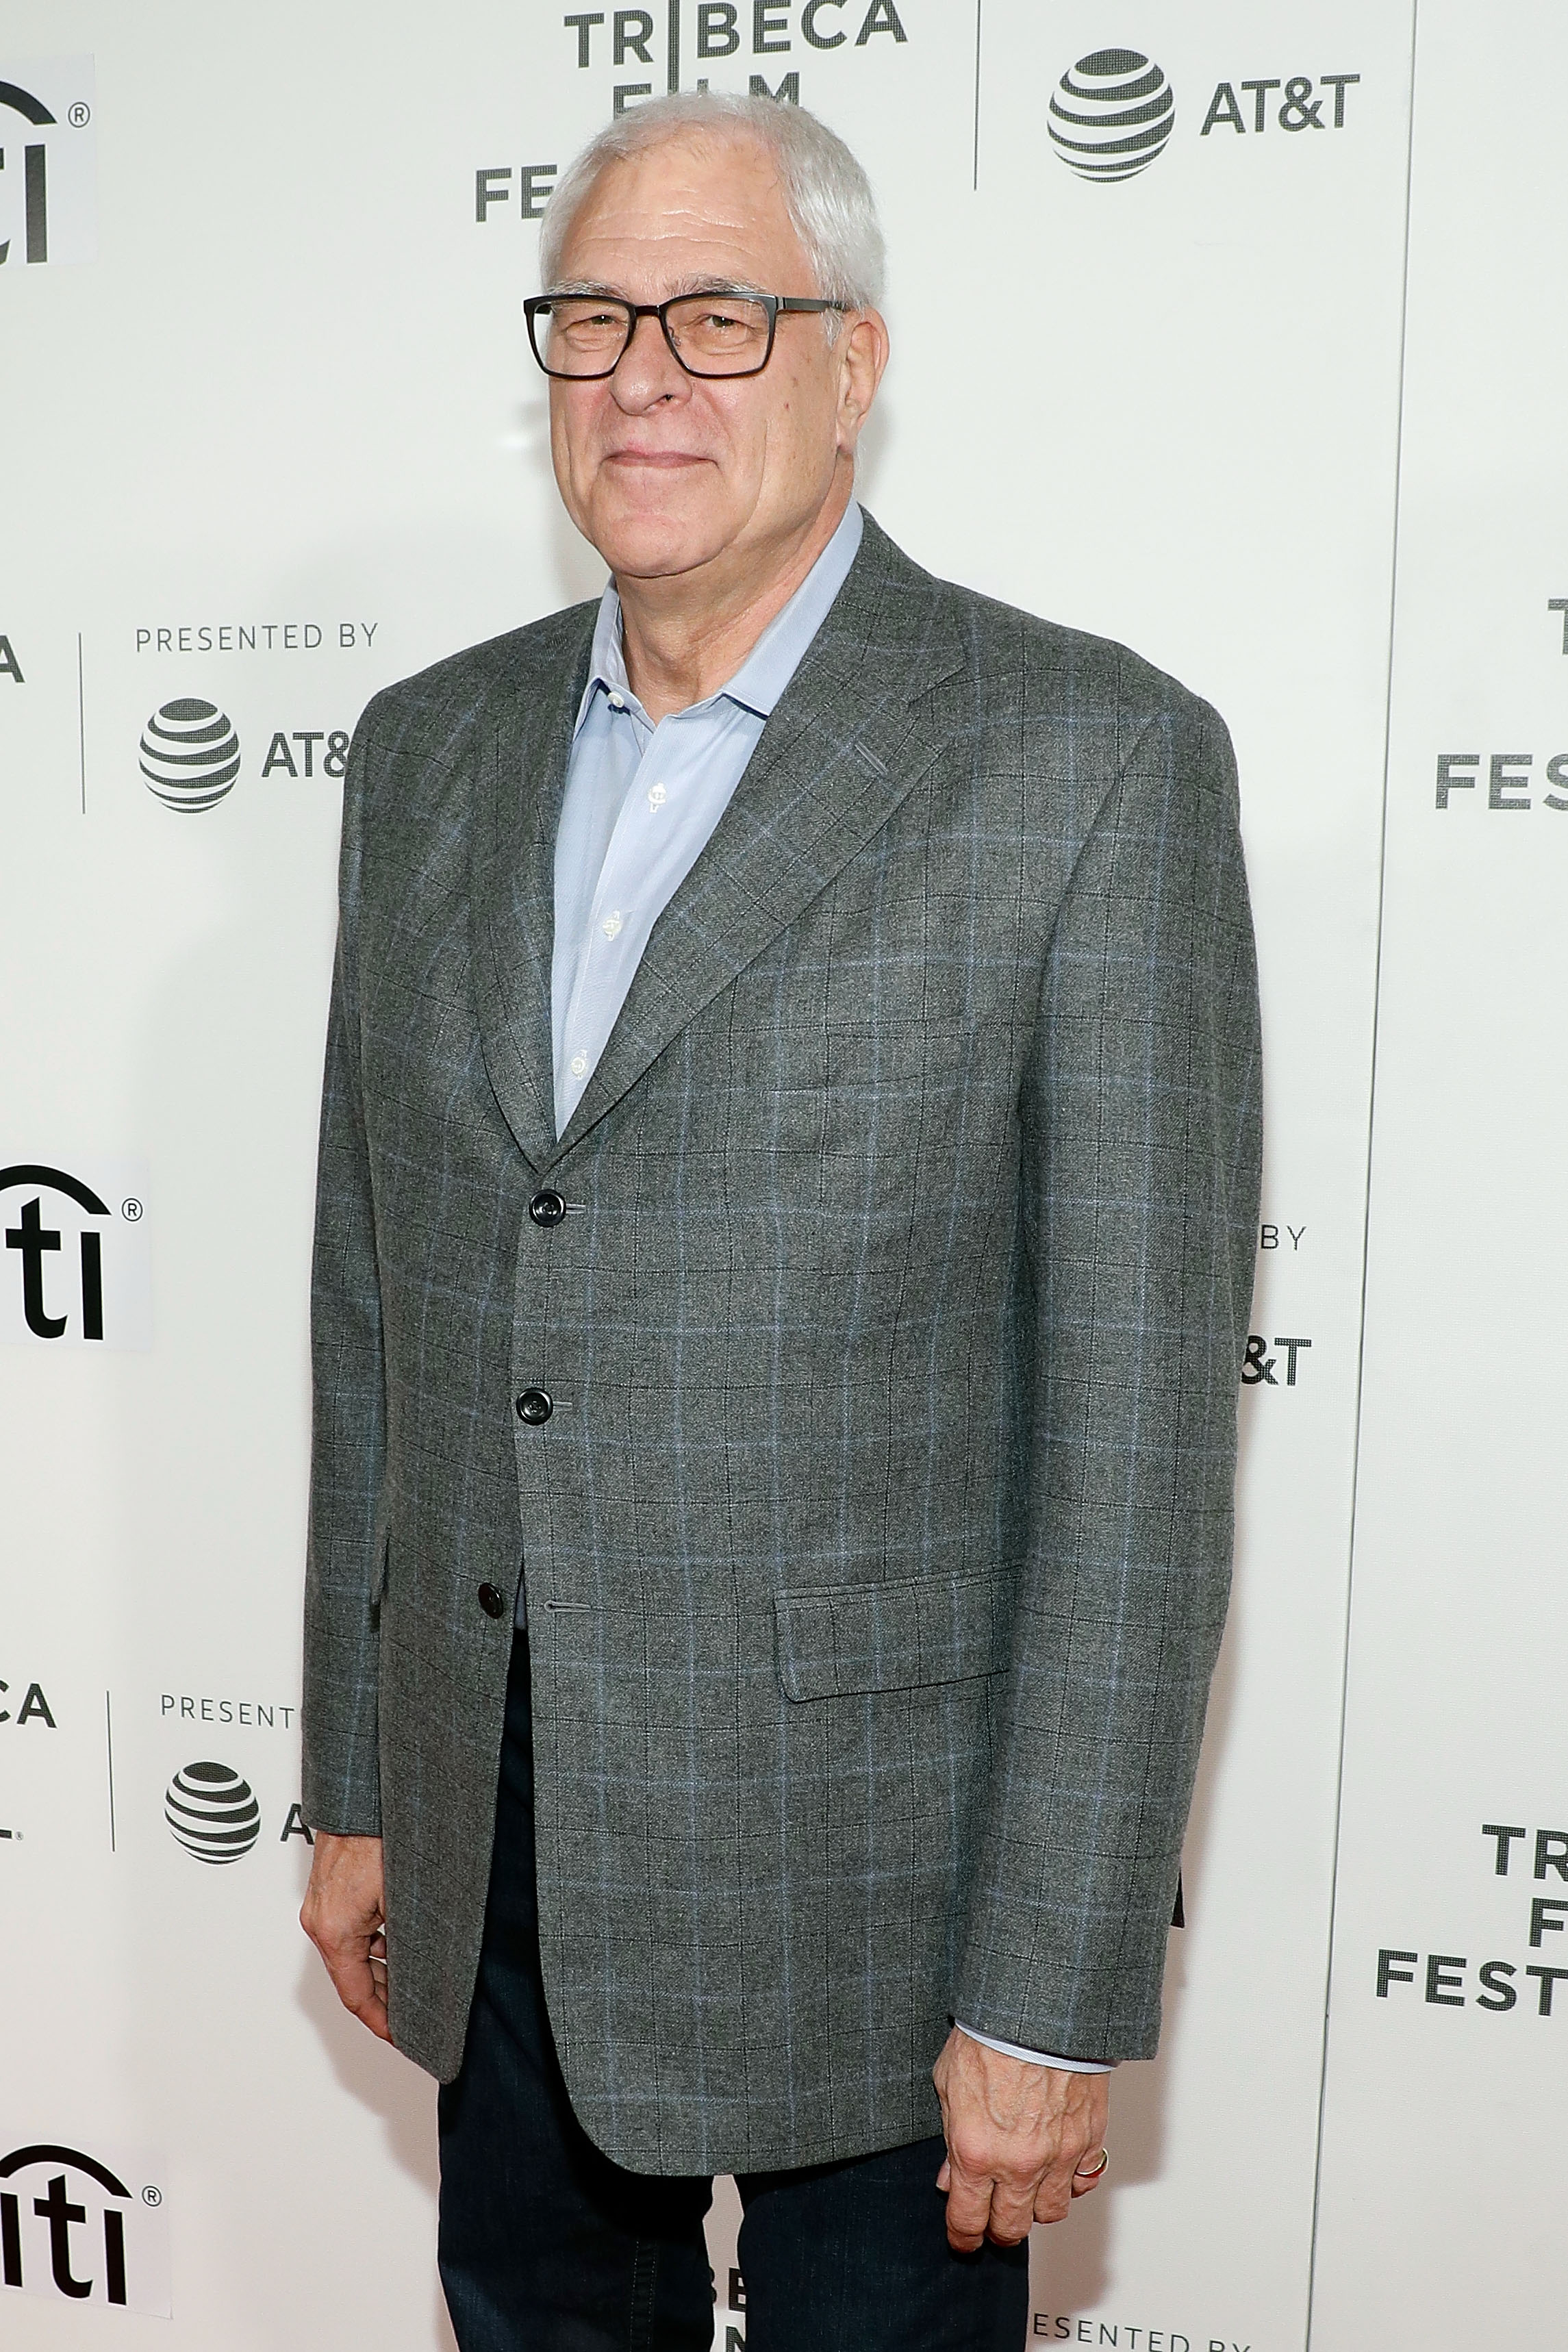  New York Knicks President Phil Jackson at Tribeca Talks during the 2017 Tribeca Film Festival at Borough of Manhattan Community College on April 23, 2017 | Photo: Getty Images